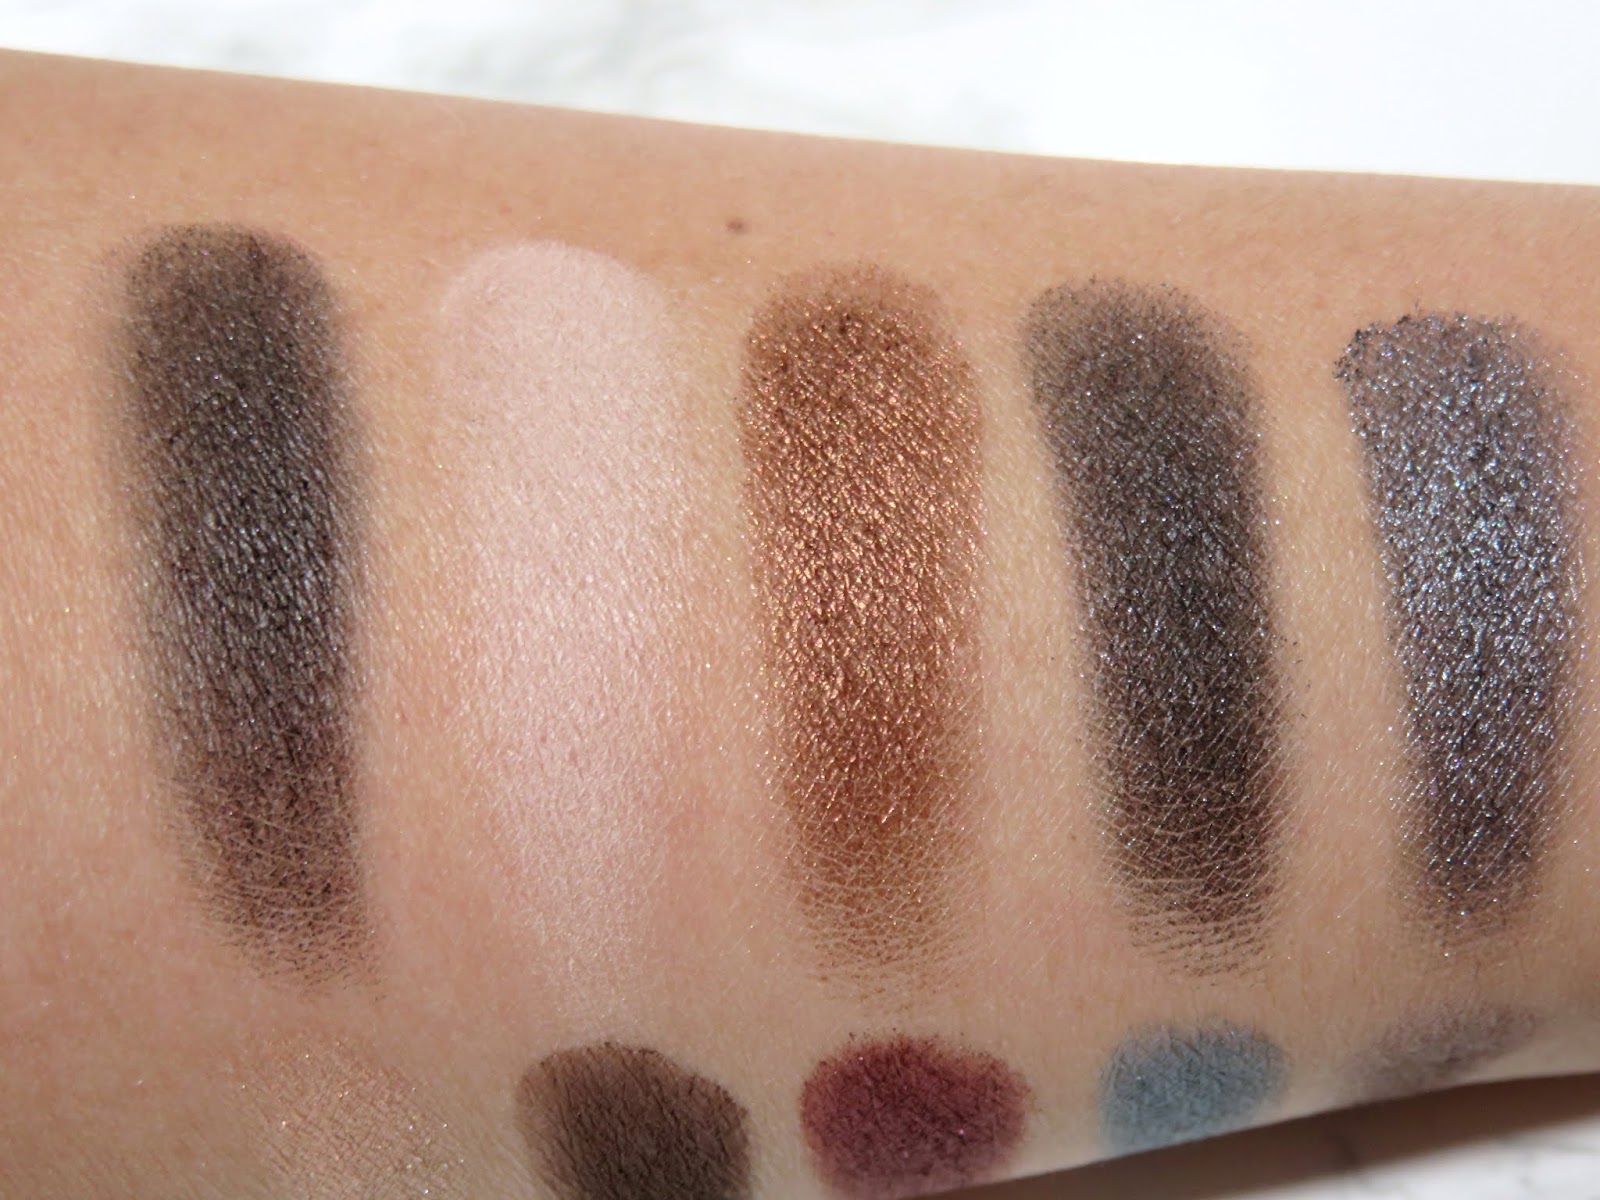 By Terry V.I.P Expert Pairs By Night Eyeshadow Palette Swatches